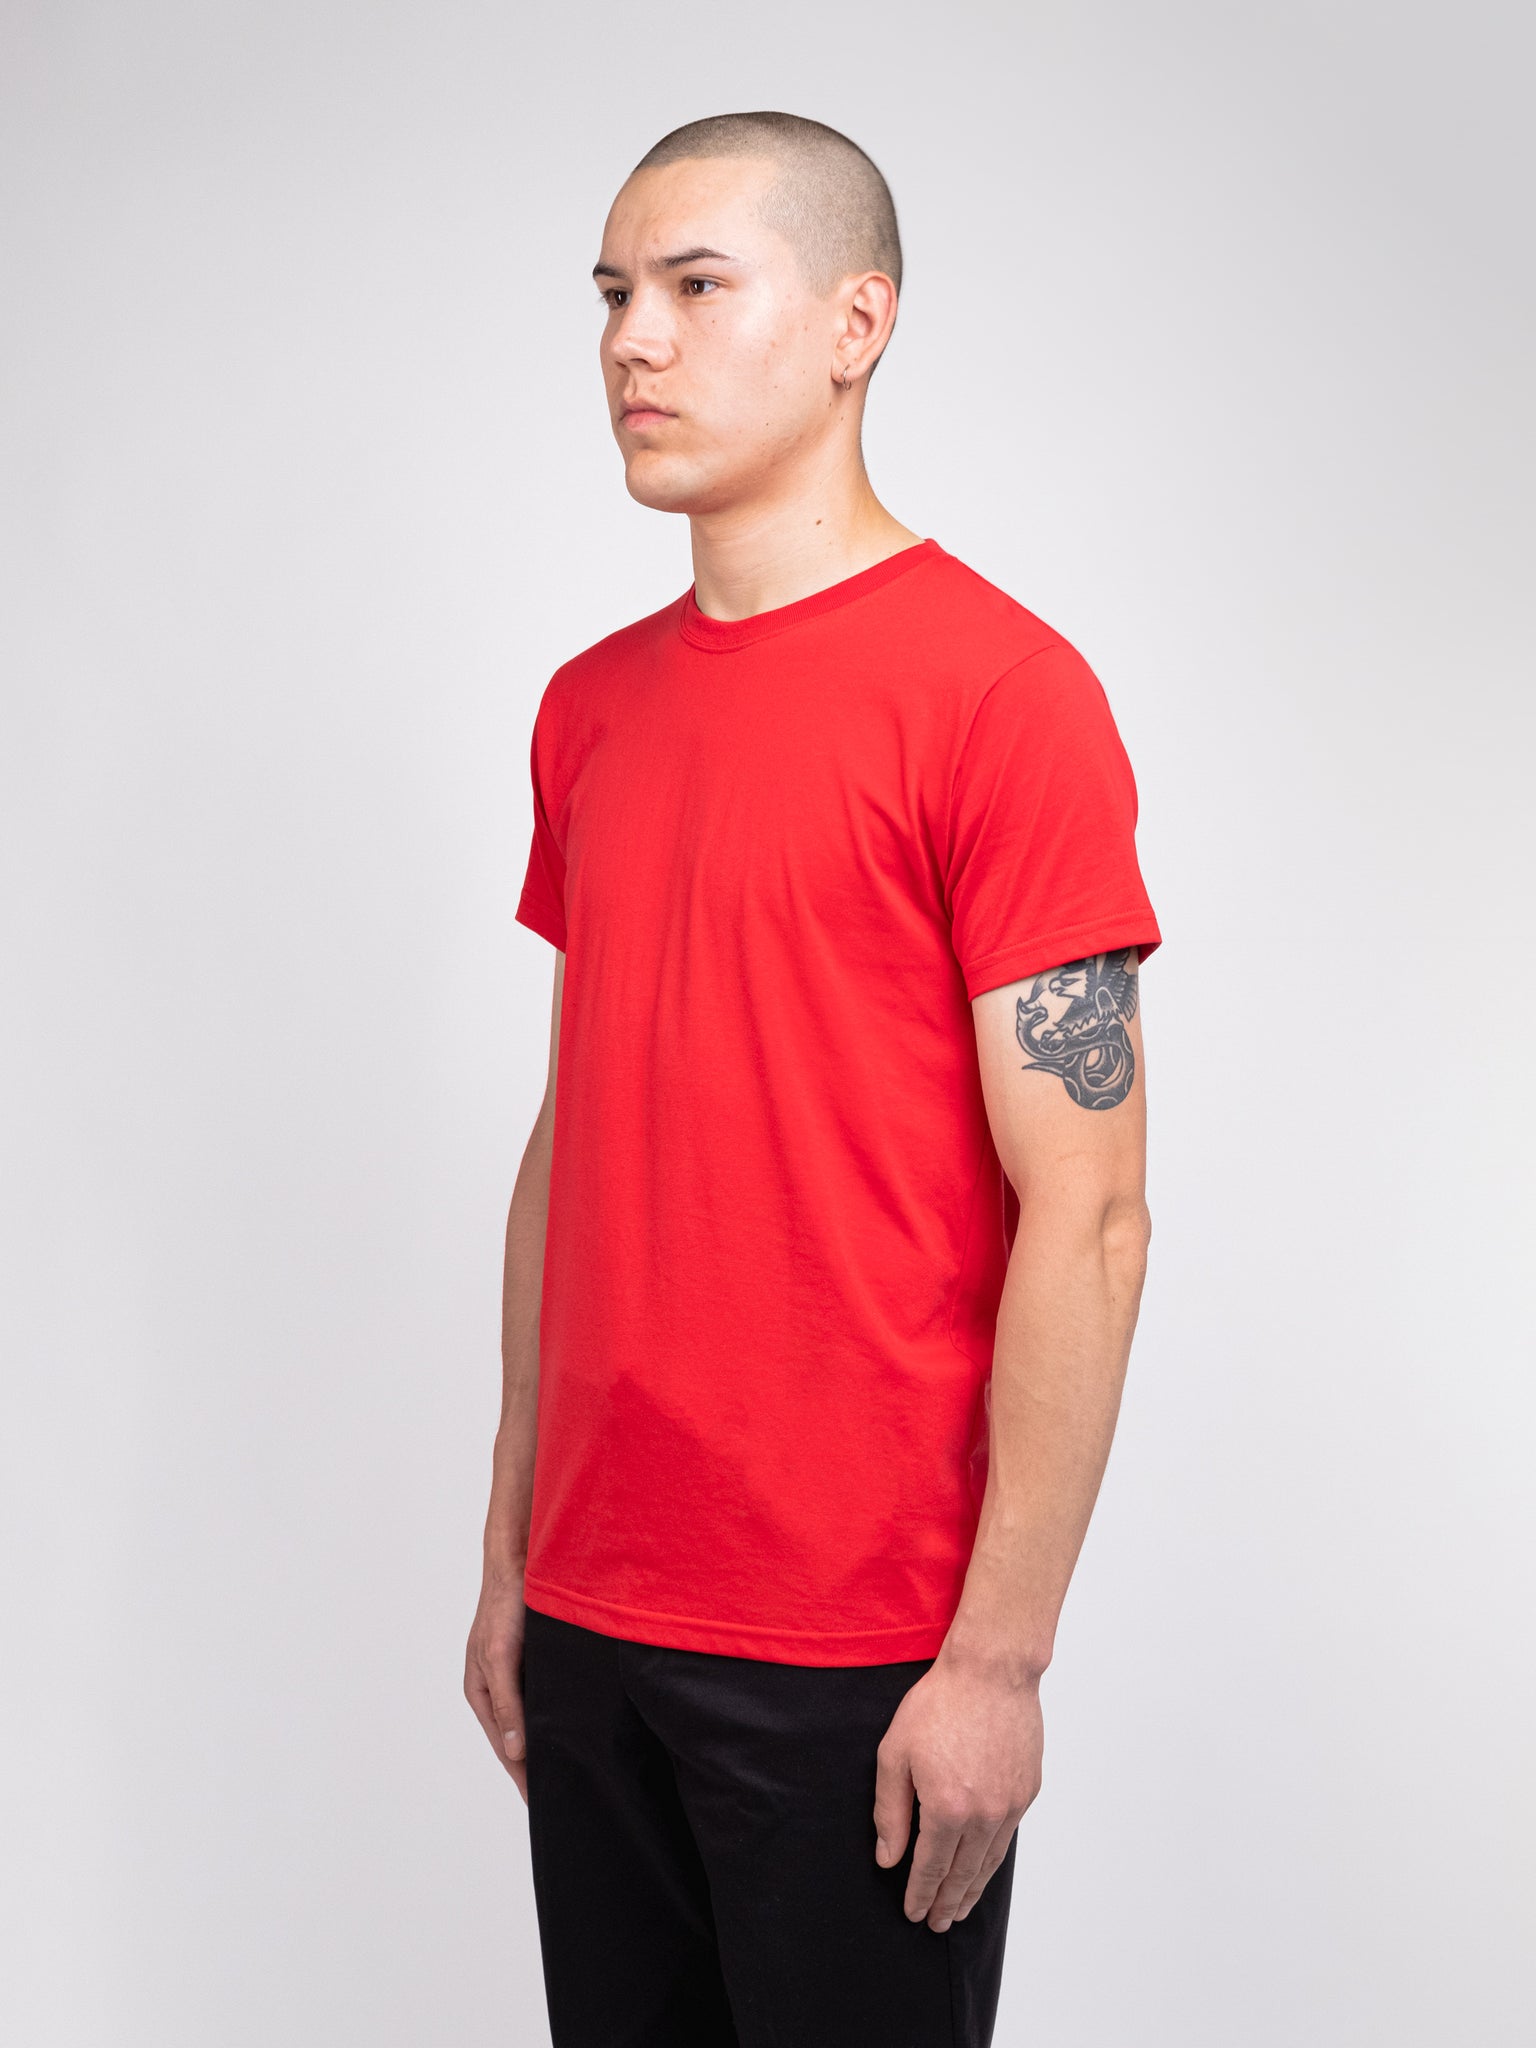 T-Shirt Fit ADAPTURE - Whirl v2 Slim – Fire